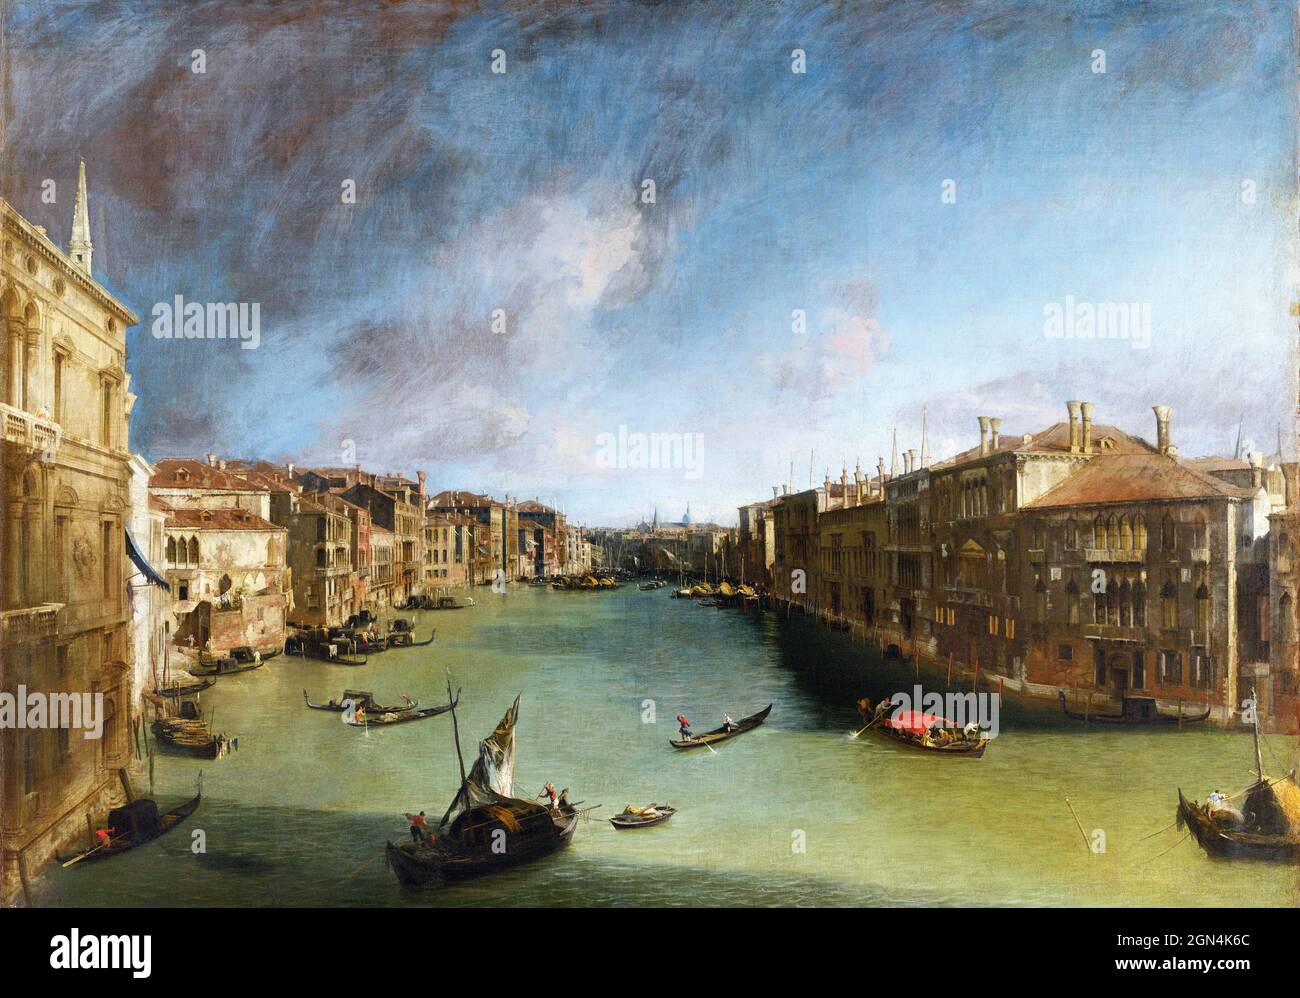 The Grand Canal from Palazzo Balbi towards the Rialto by Canaletto (Giovanni Antonio Canal - 1697-1768), oil on canvas, c. 1722 Stock Photo